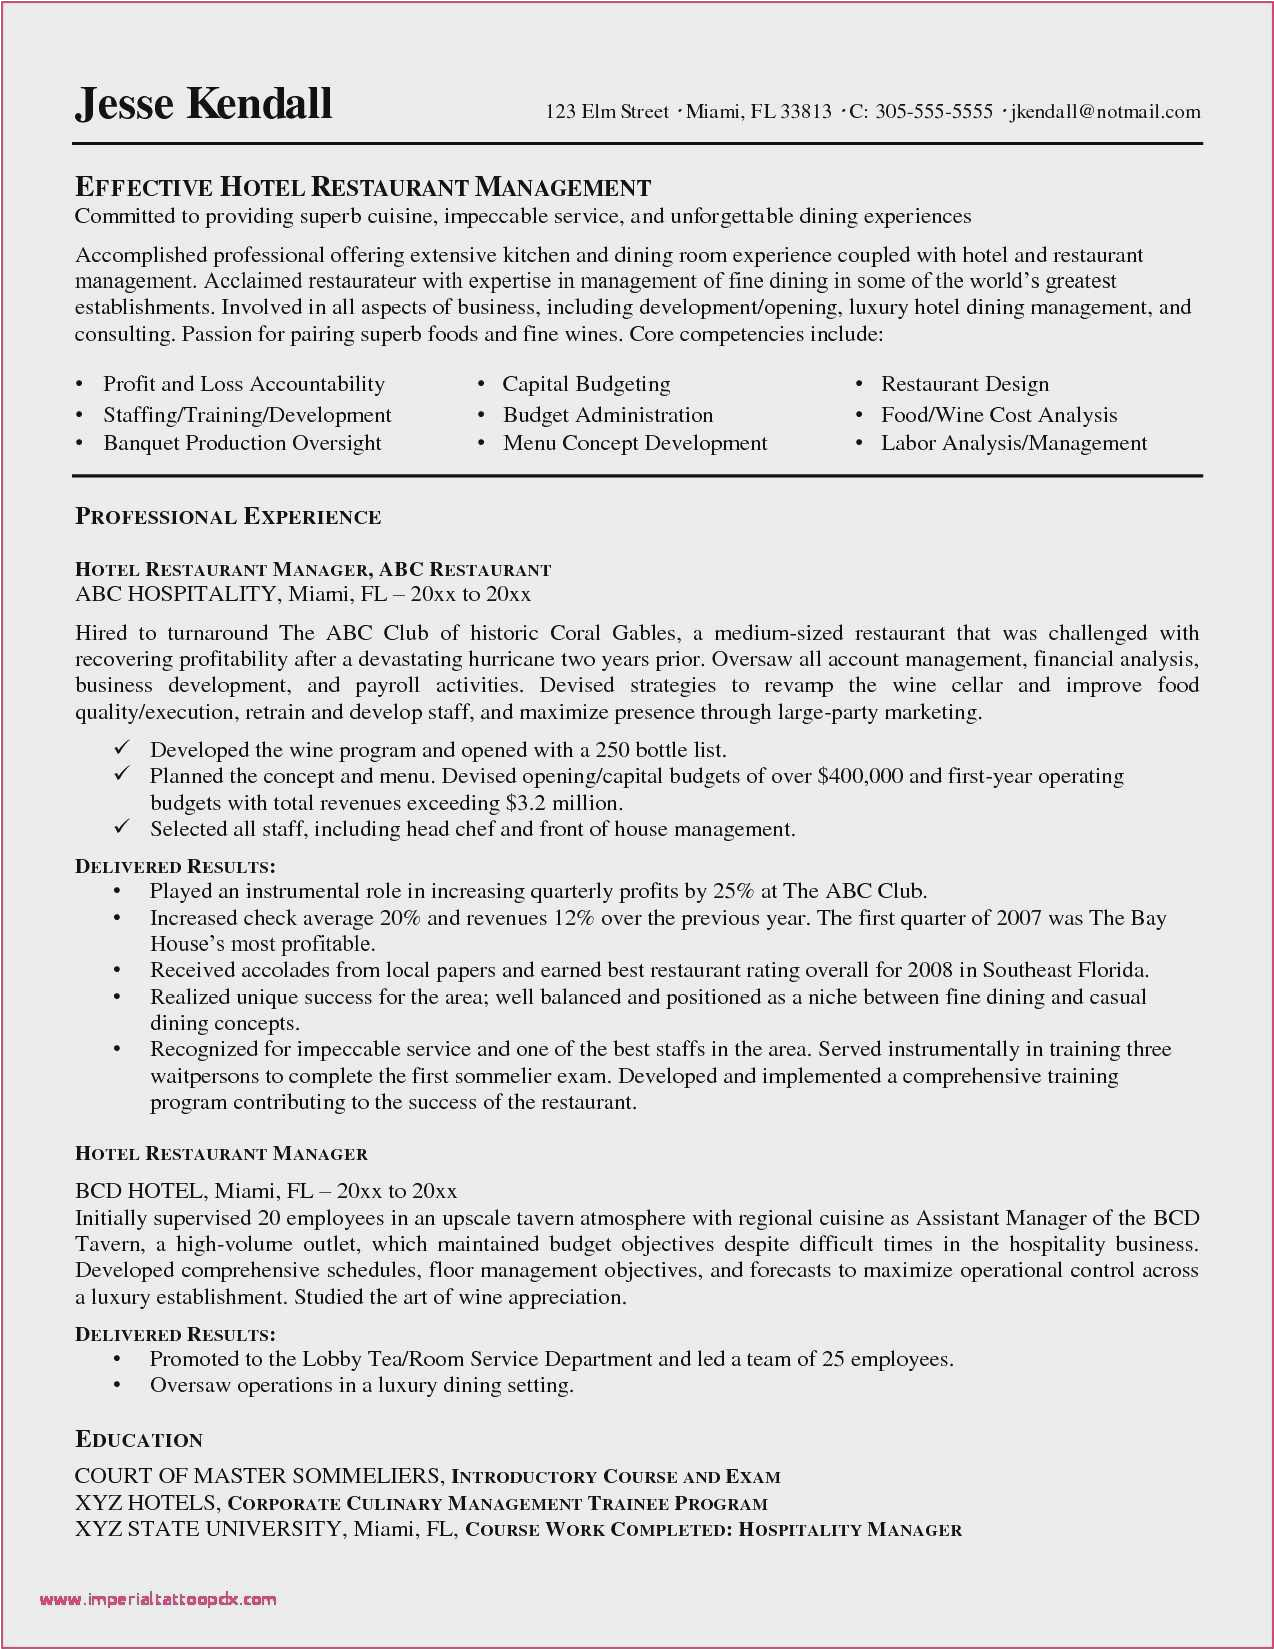 Sample Resume for Hotel and Restaurant Management Hotel Manager Resume Example 57 Picture